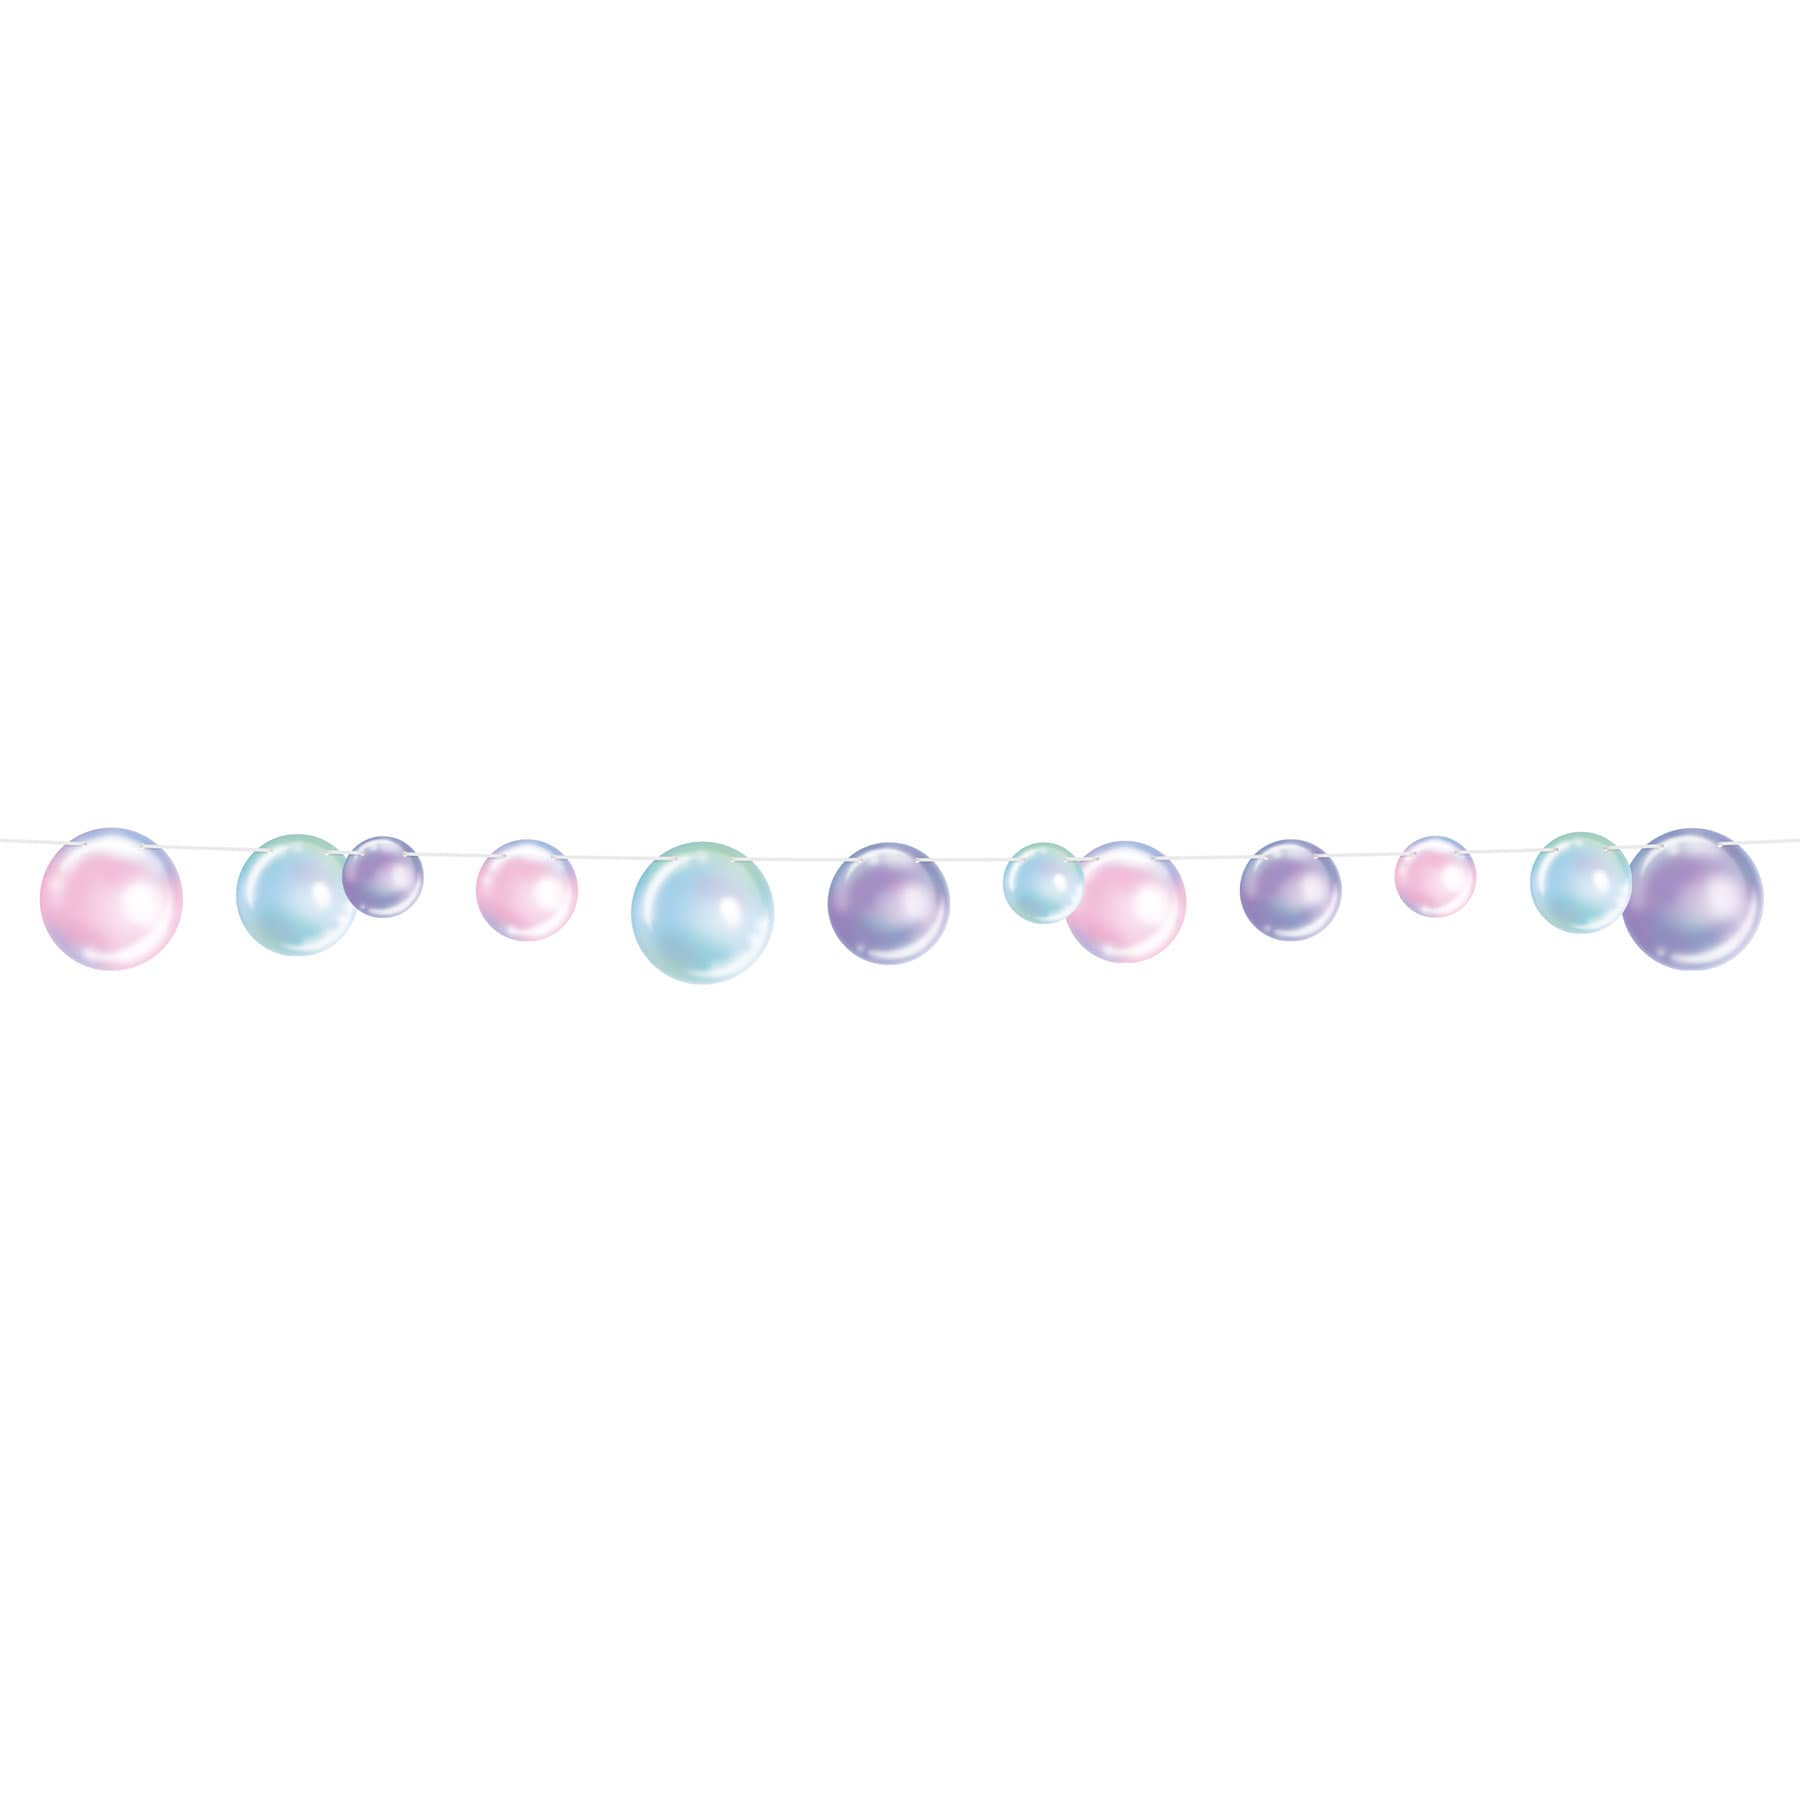 Bubble Streamers are printed on card stock material in beautiful colors of purple, pink and blue with various sizes.